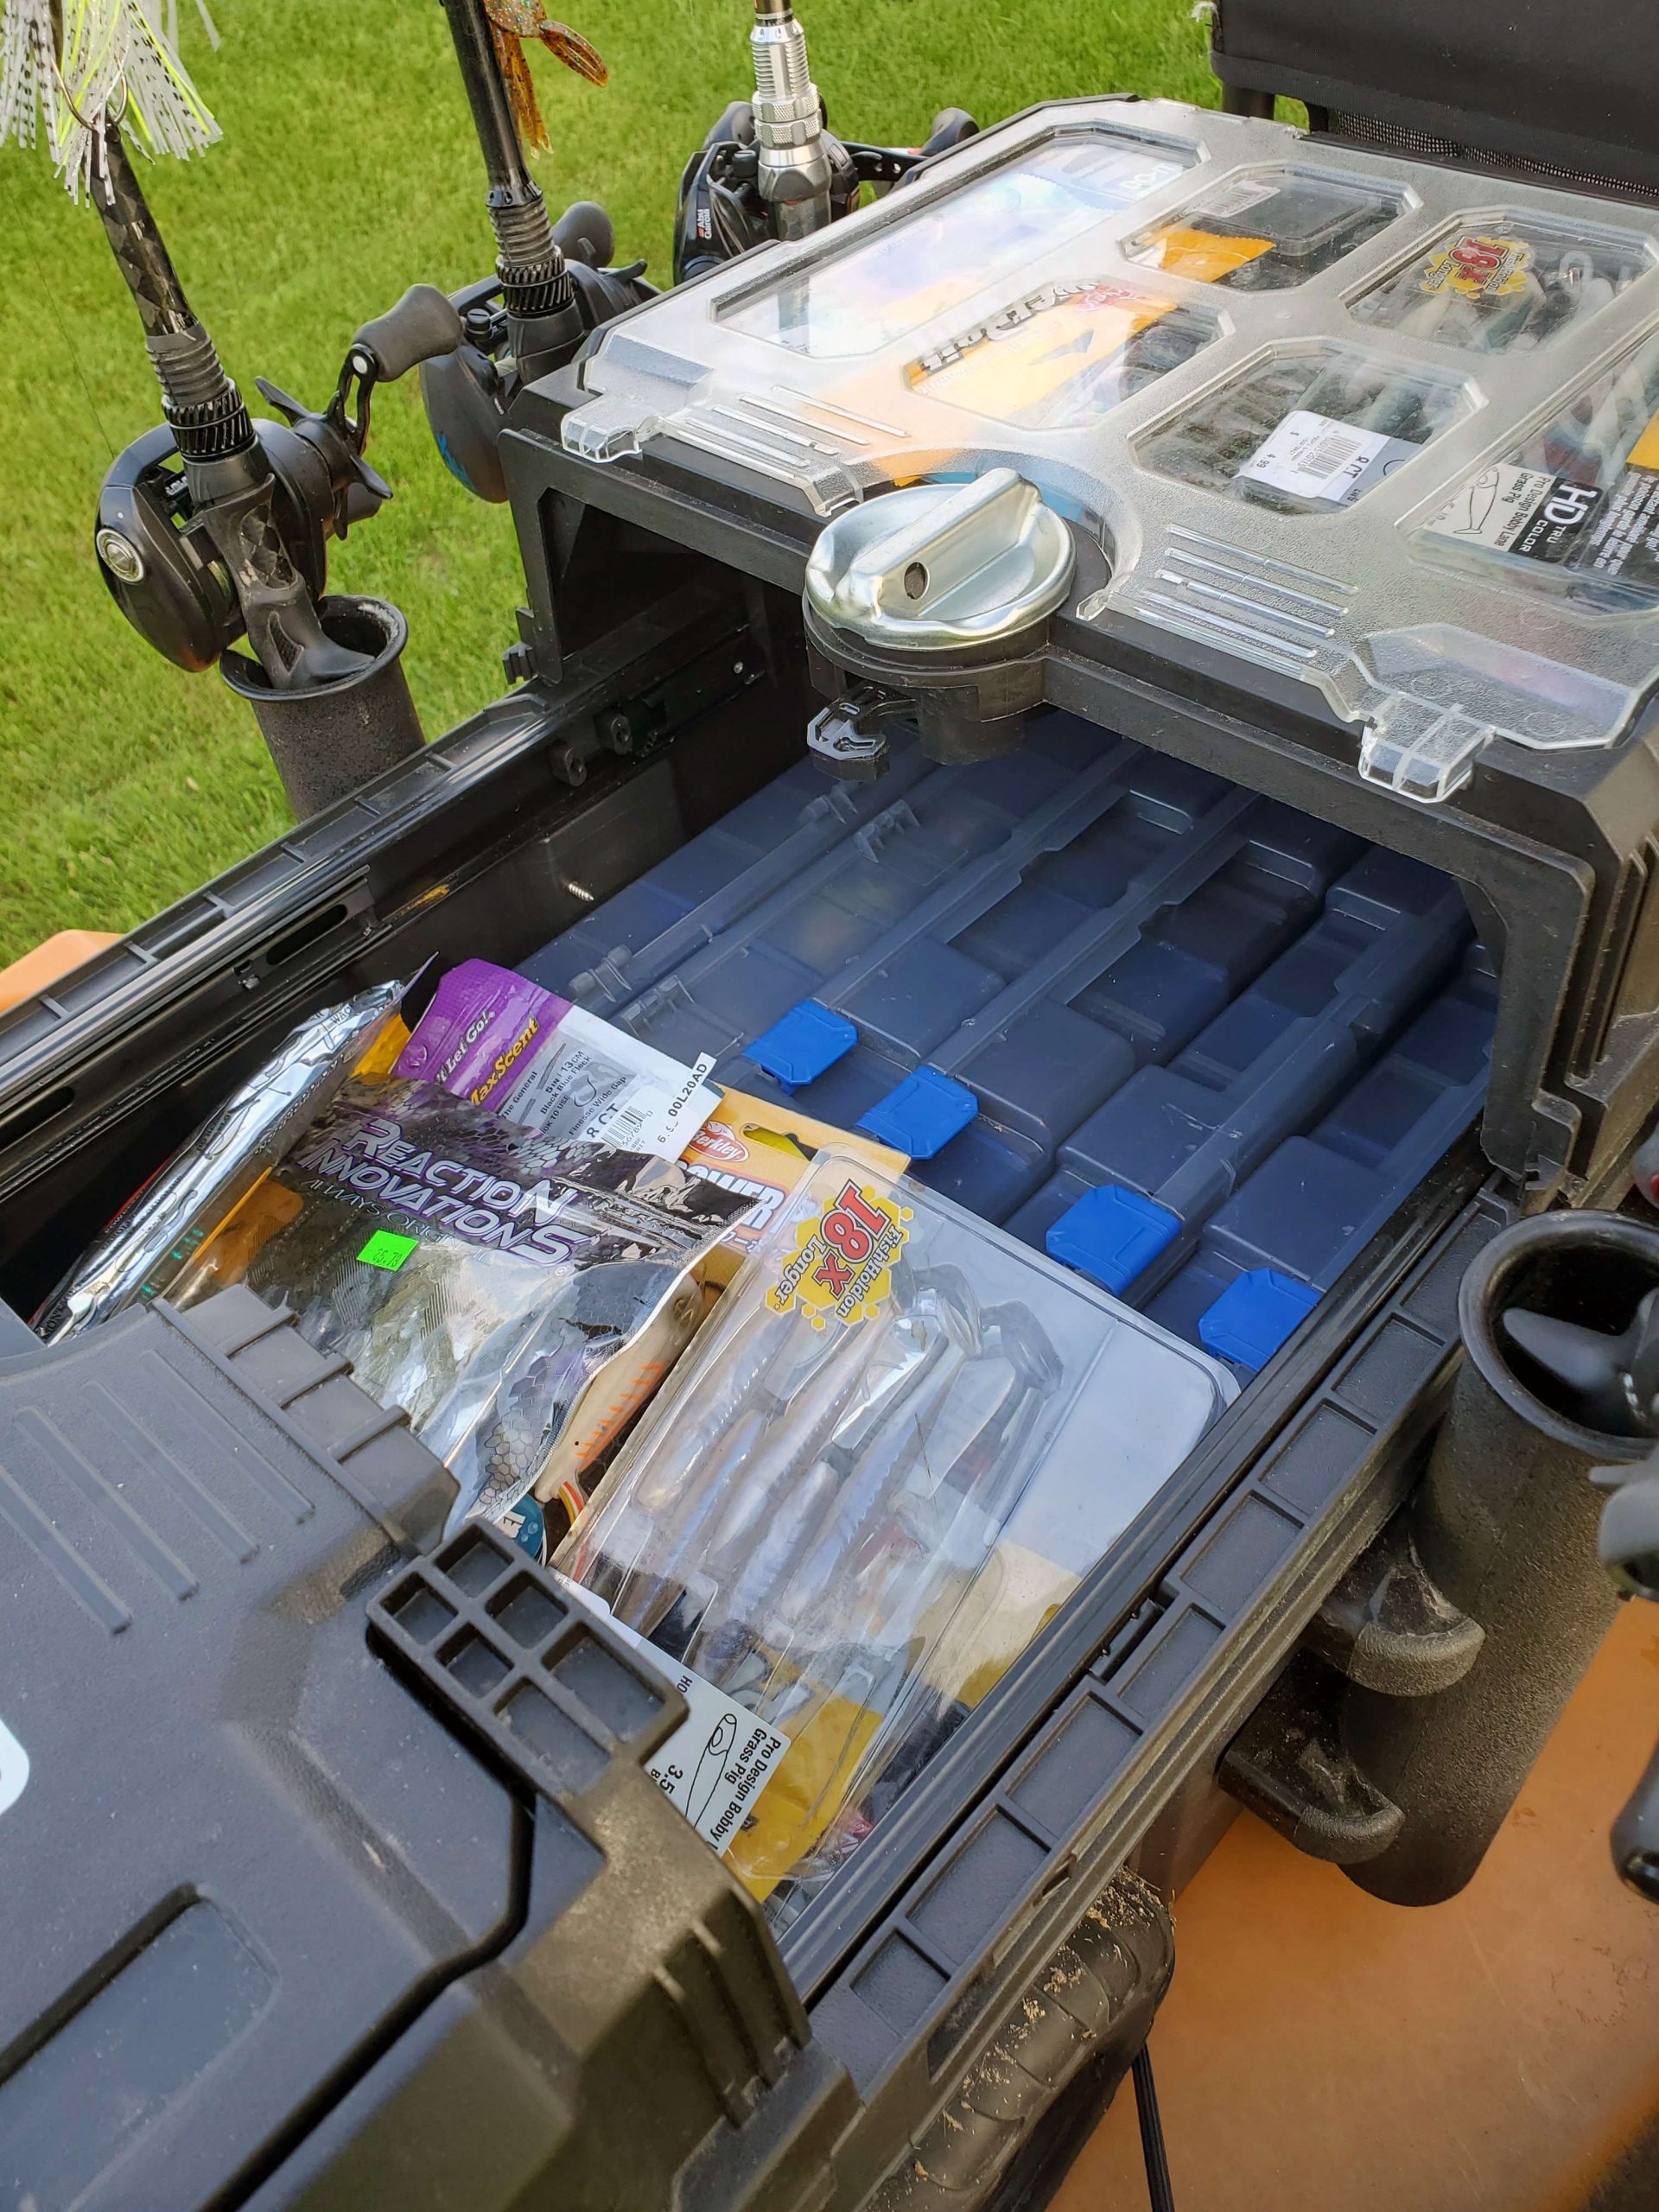 Tackle organization is essential. That is why Cole runs a customized Hart toolbox on his kayak.